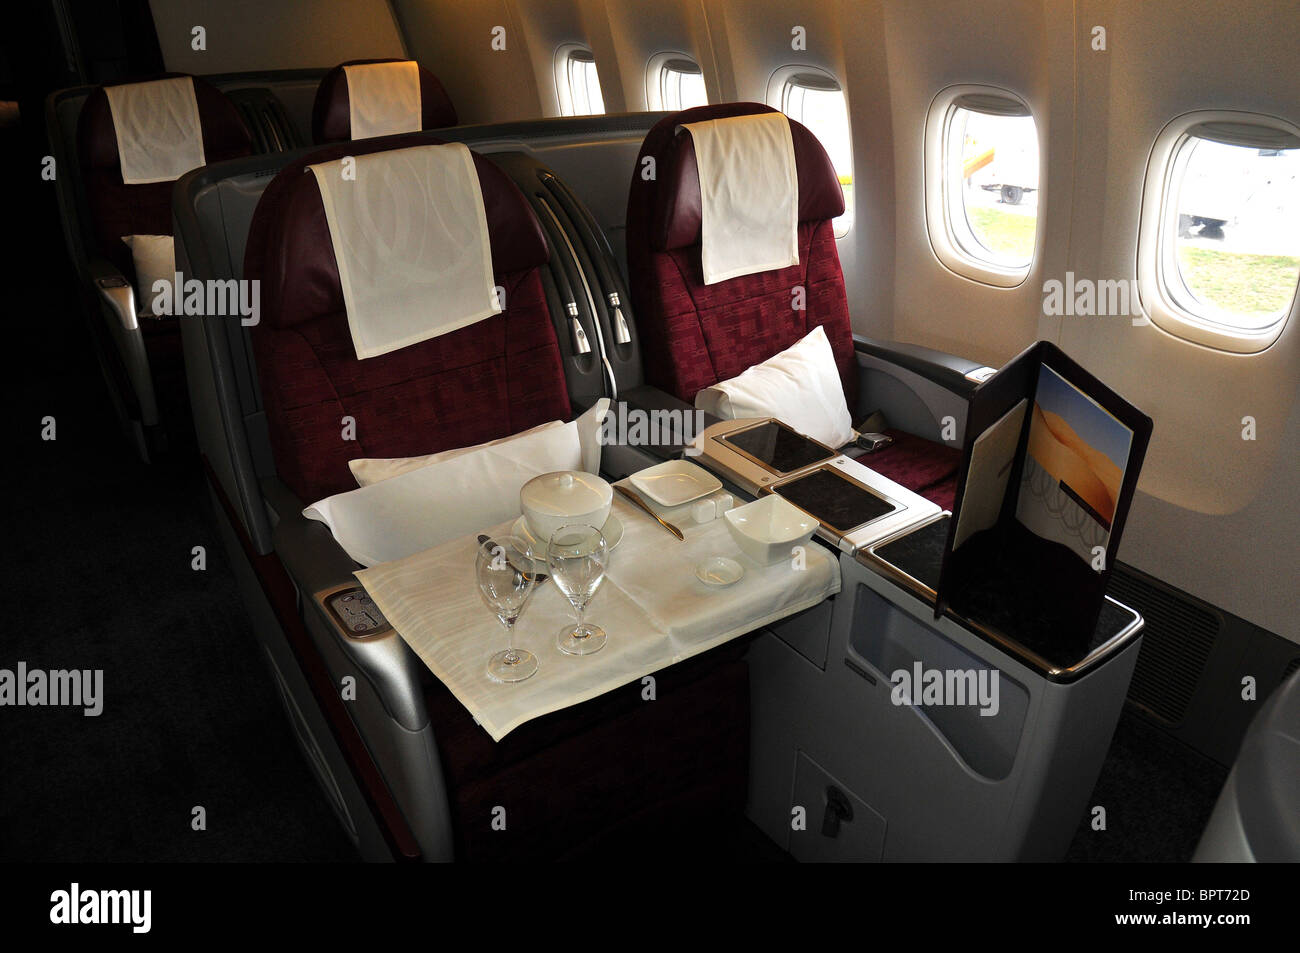 Qatar Airlines, 1st class seats on Boeing 777 Stock Photo